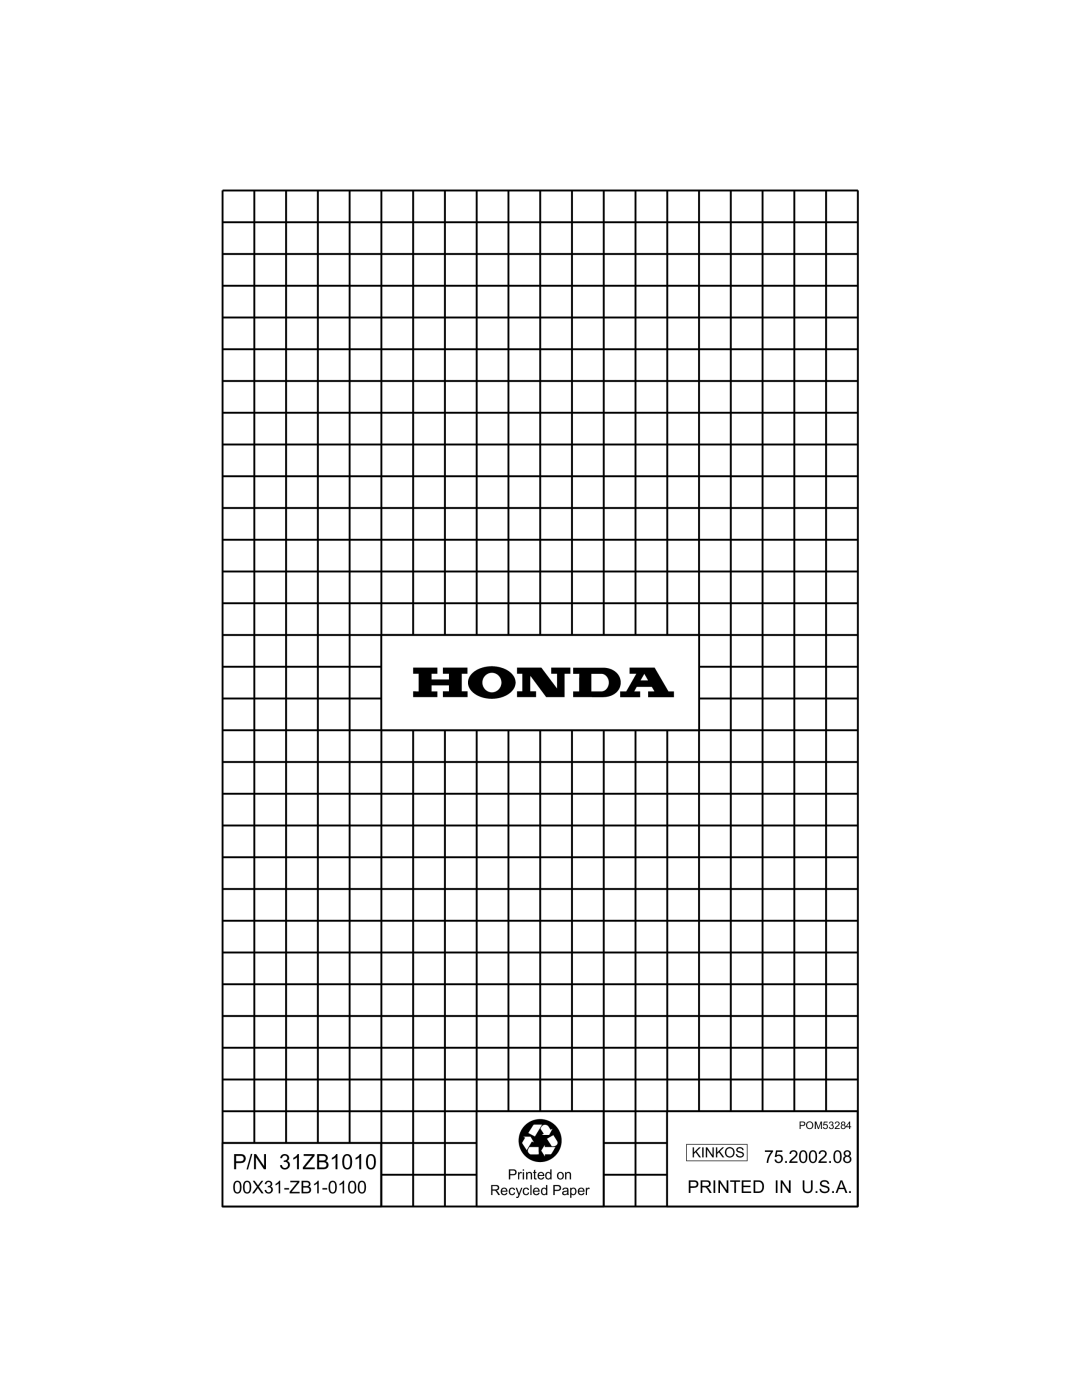 Honda Power Equipment EM1800X, EM2200X, EM1600X P/N 31ZB1010, 75.2002.08, 00X31-ZB1-0100, Recycled Paper, POM53284 